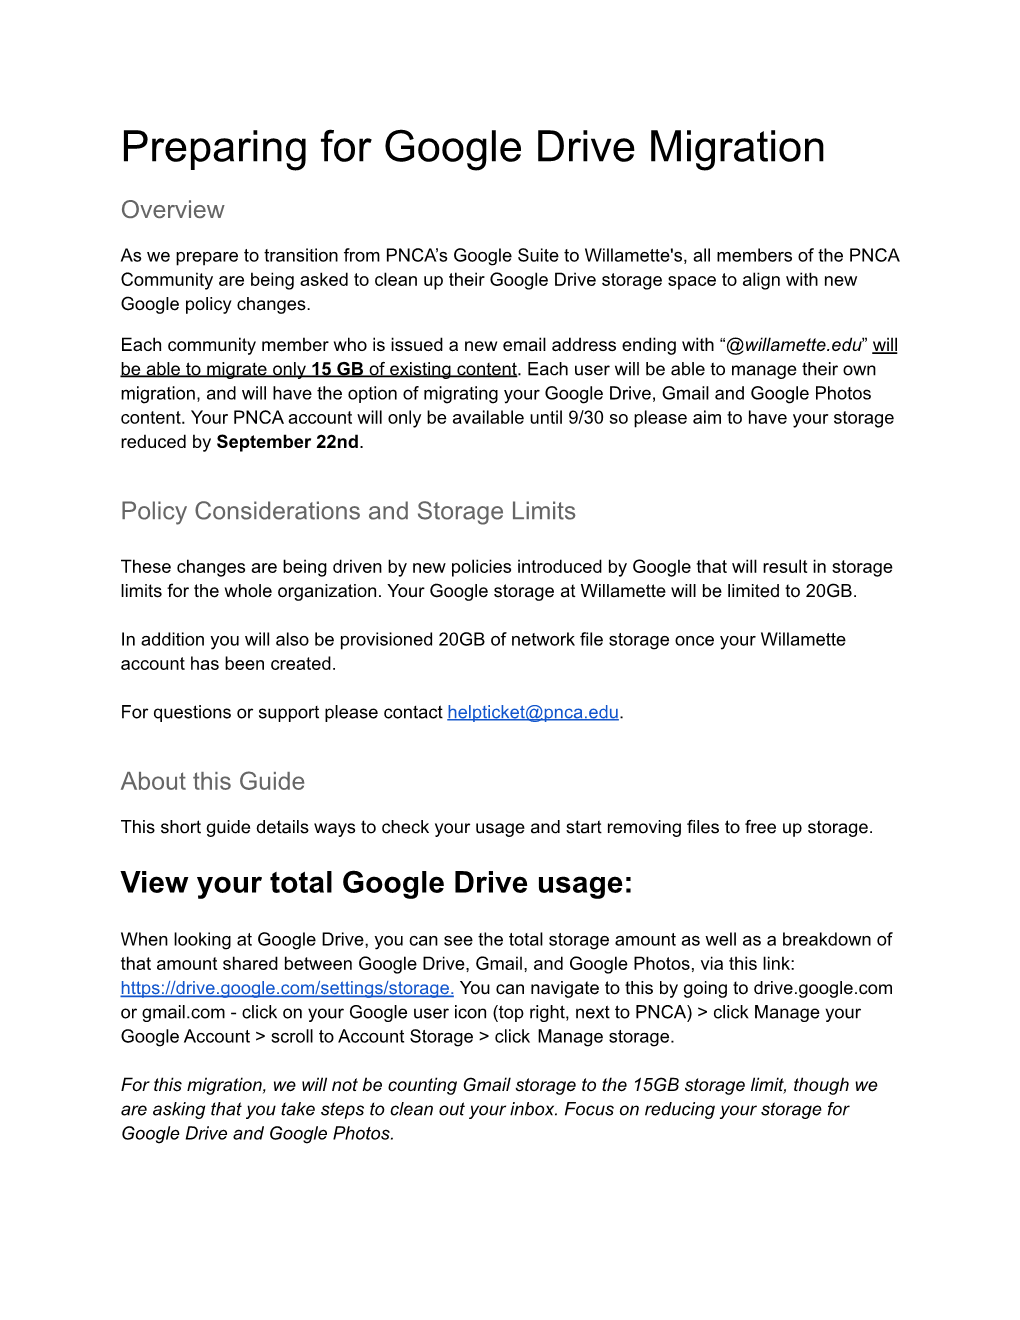 Preparing for Google Drive Migration Guide for Students